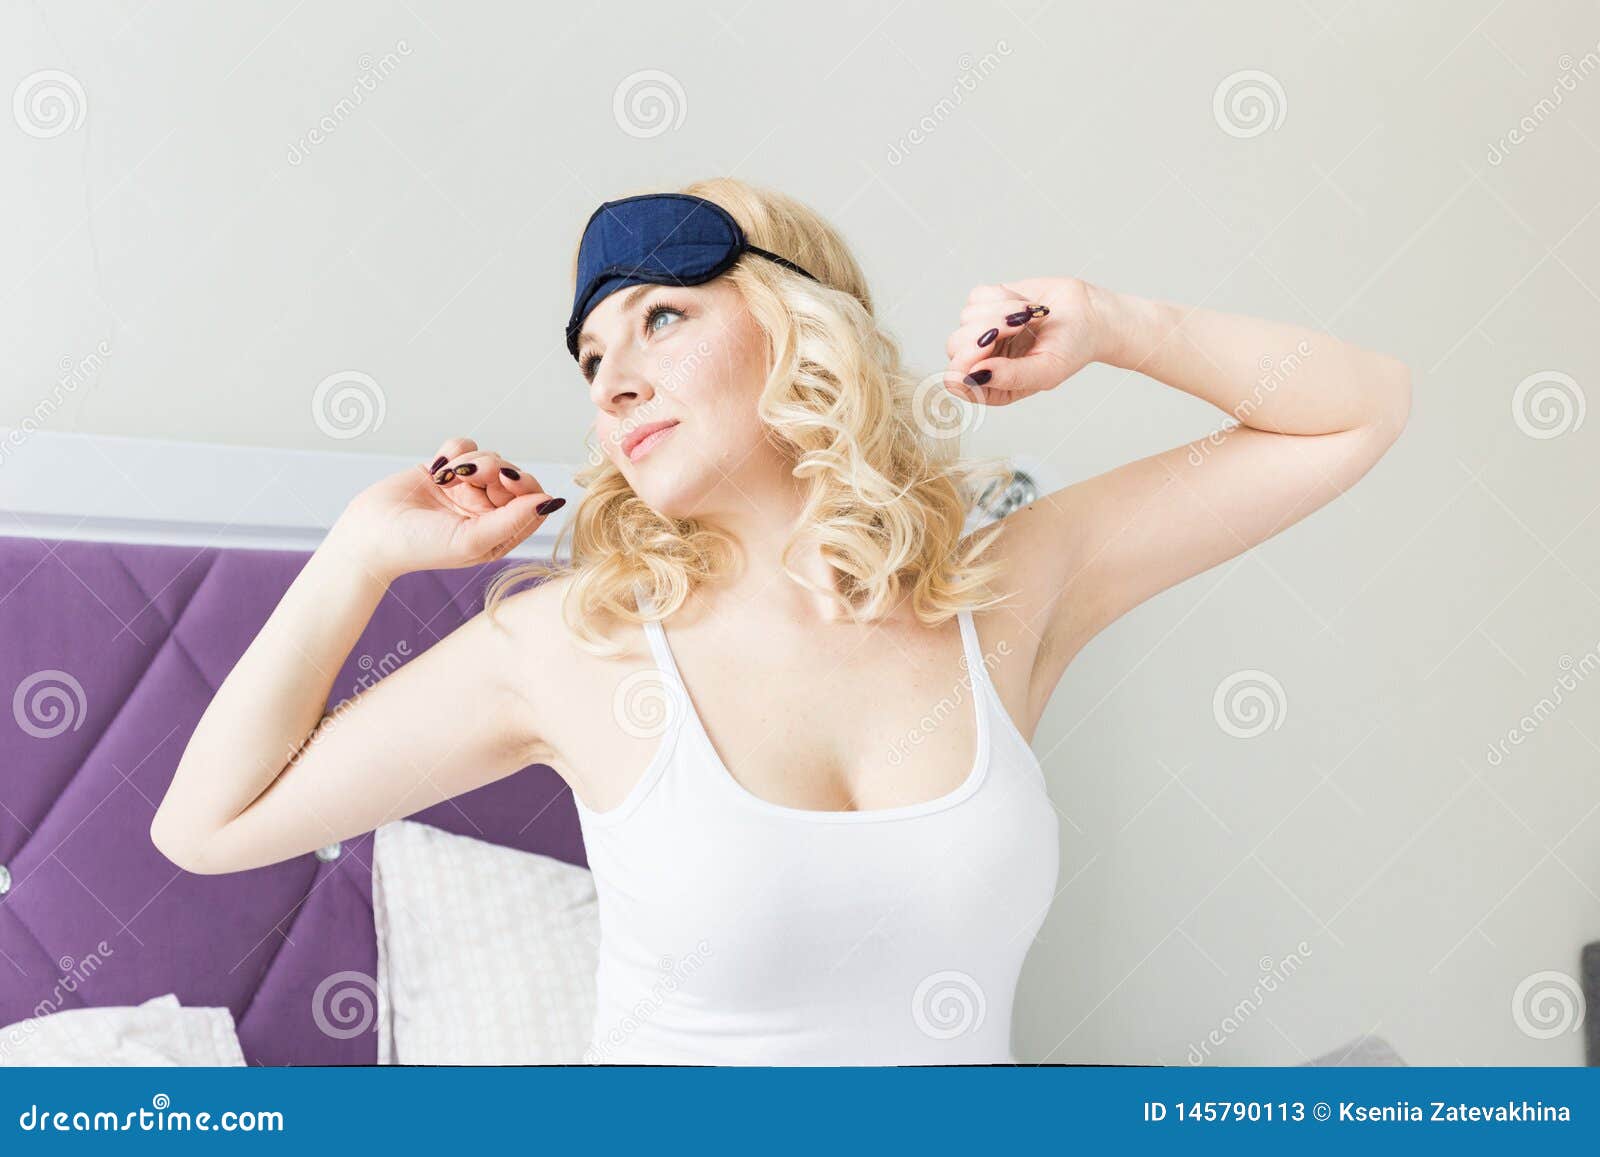 A Beautiful Blonde Woman Wakes Up And Snares A Mask For Sleeping In Her Bed In The Morning Stock